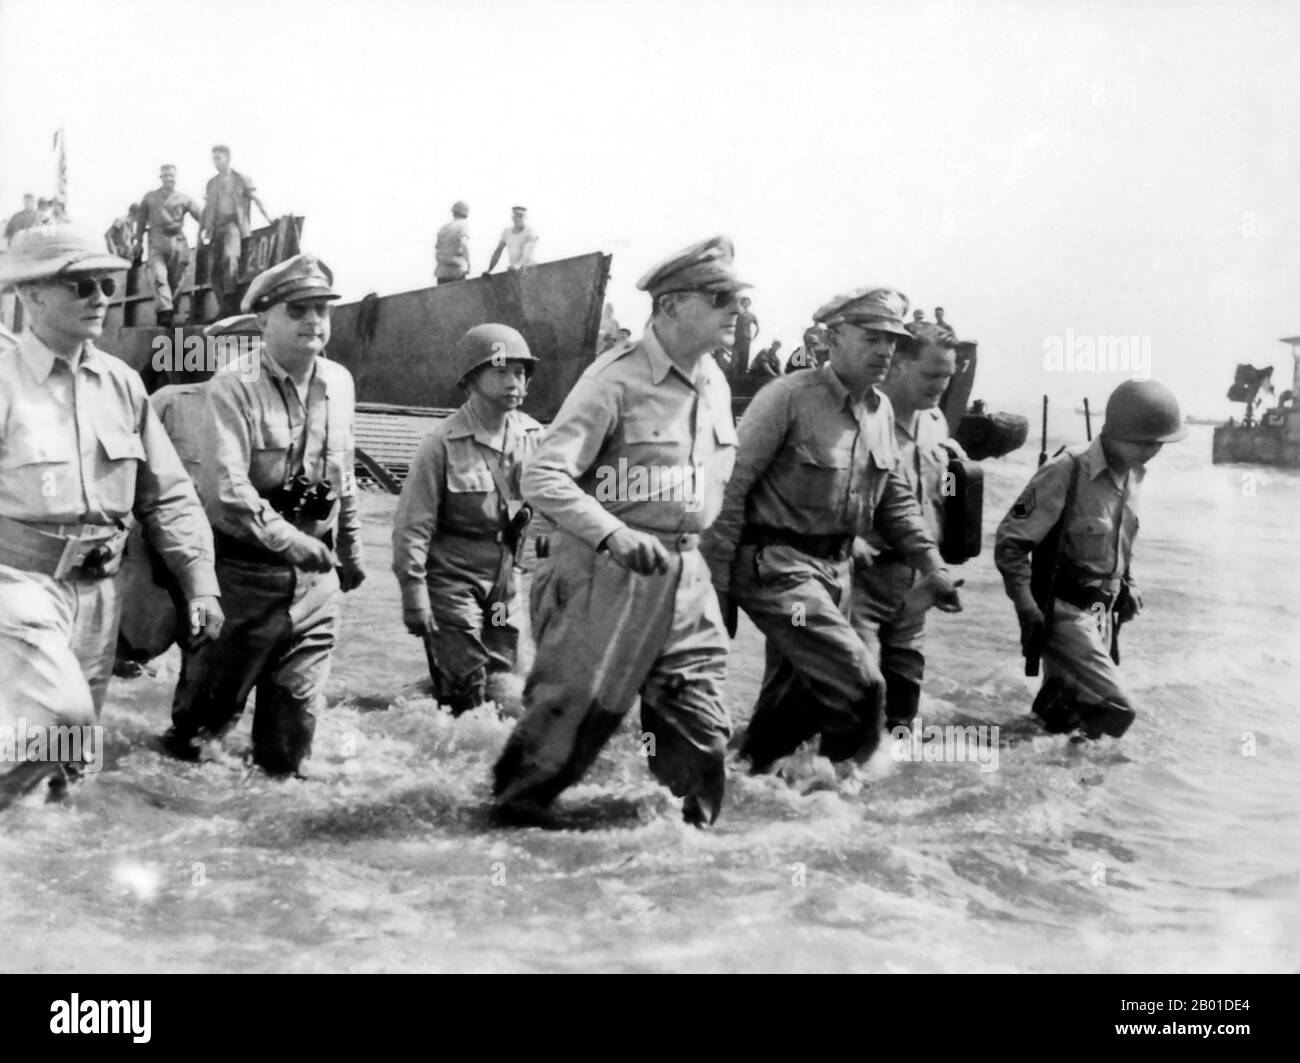 USA/Philippines: 'I have returned' — General MacArthur returns to the Philippines with Philippine President Sergio Osmena to his right and General Richard K. Sutherland on his left, Leyte, 20 October 1944.  General of the Army Douglas MacArthur (26 January 26 1880 - 5 April 1964) was an American general and field marshal of the Philippine Army. He was a Chief of Staff of the United States Army during the 1930s and played a prominent role in the Pacific theater during World War II. He received the Medal of Honor for his service in the Philippines Campaign. Stock Photo